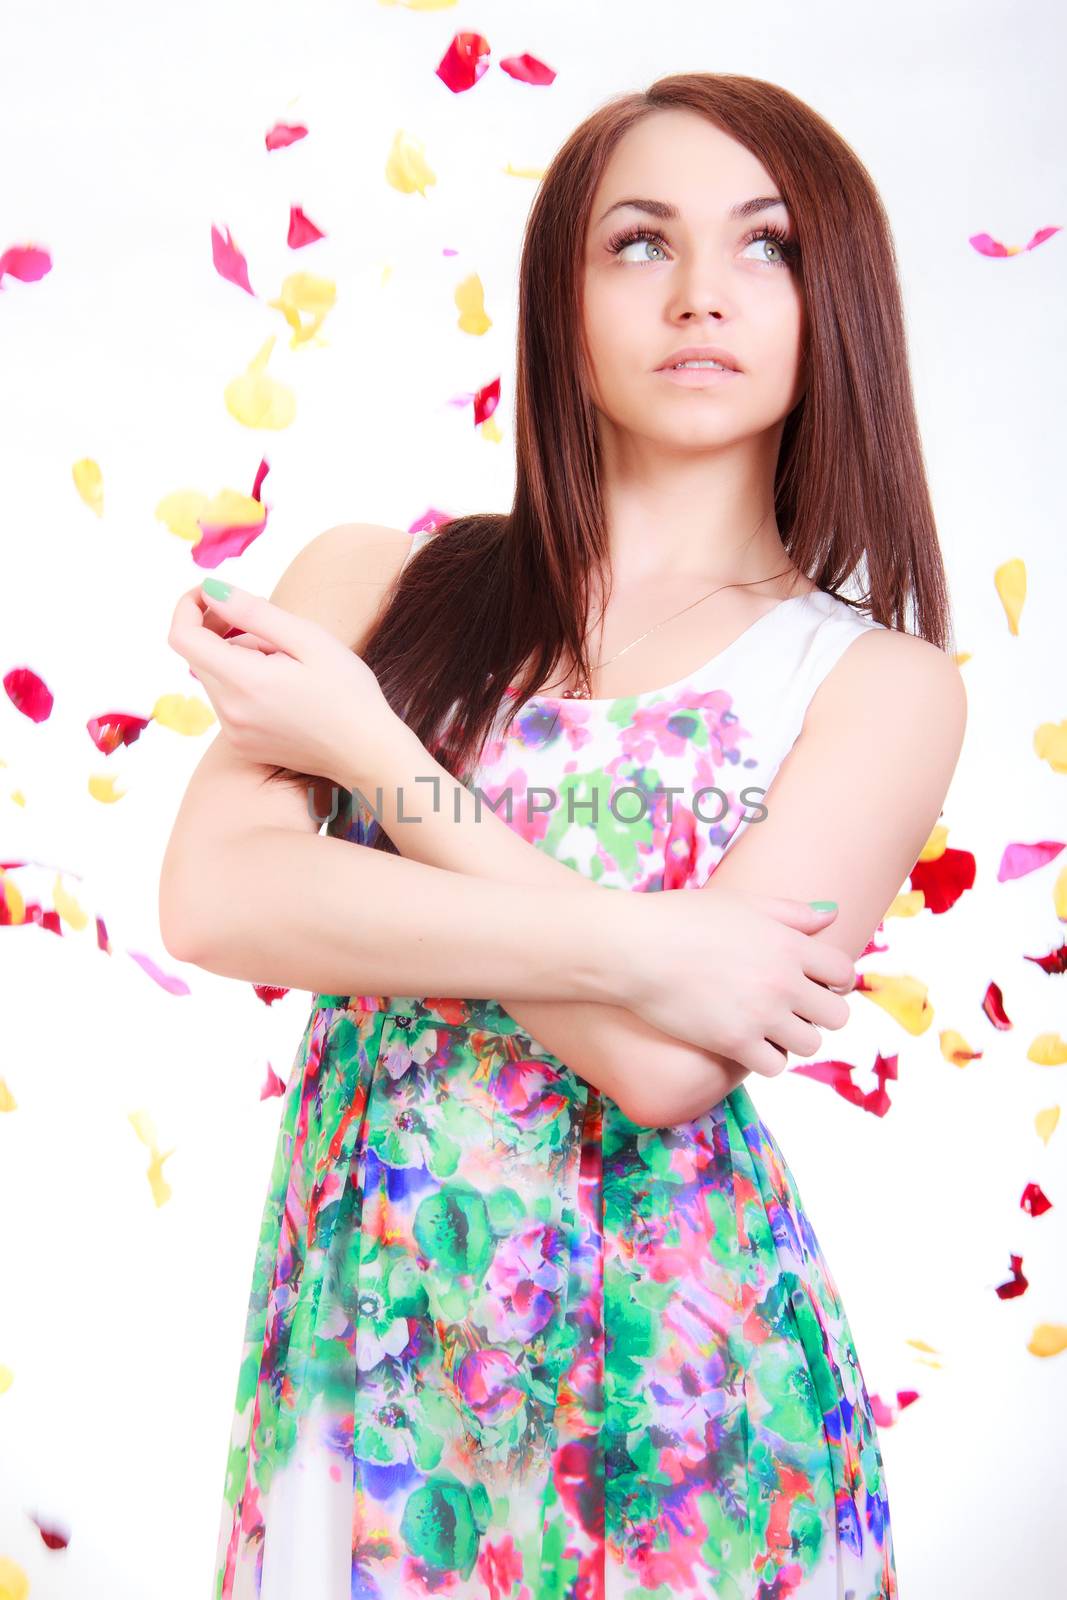 Beautiful young woman in a bright dress over white background